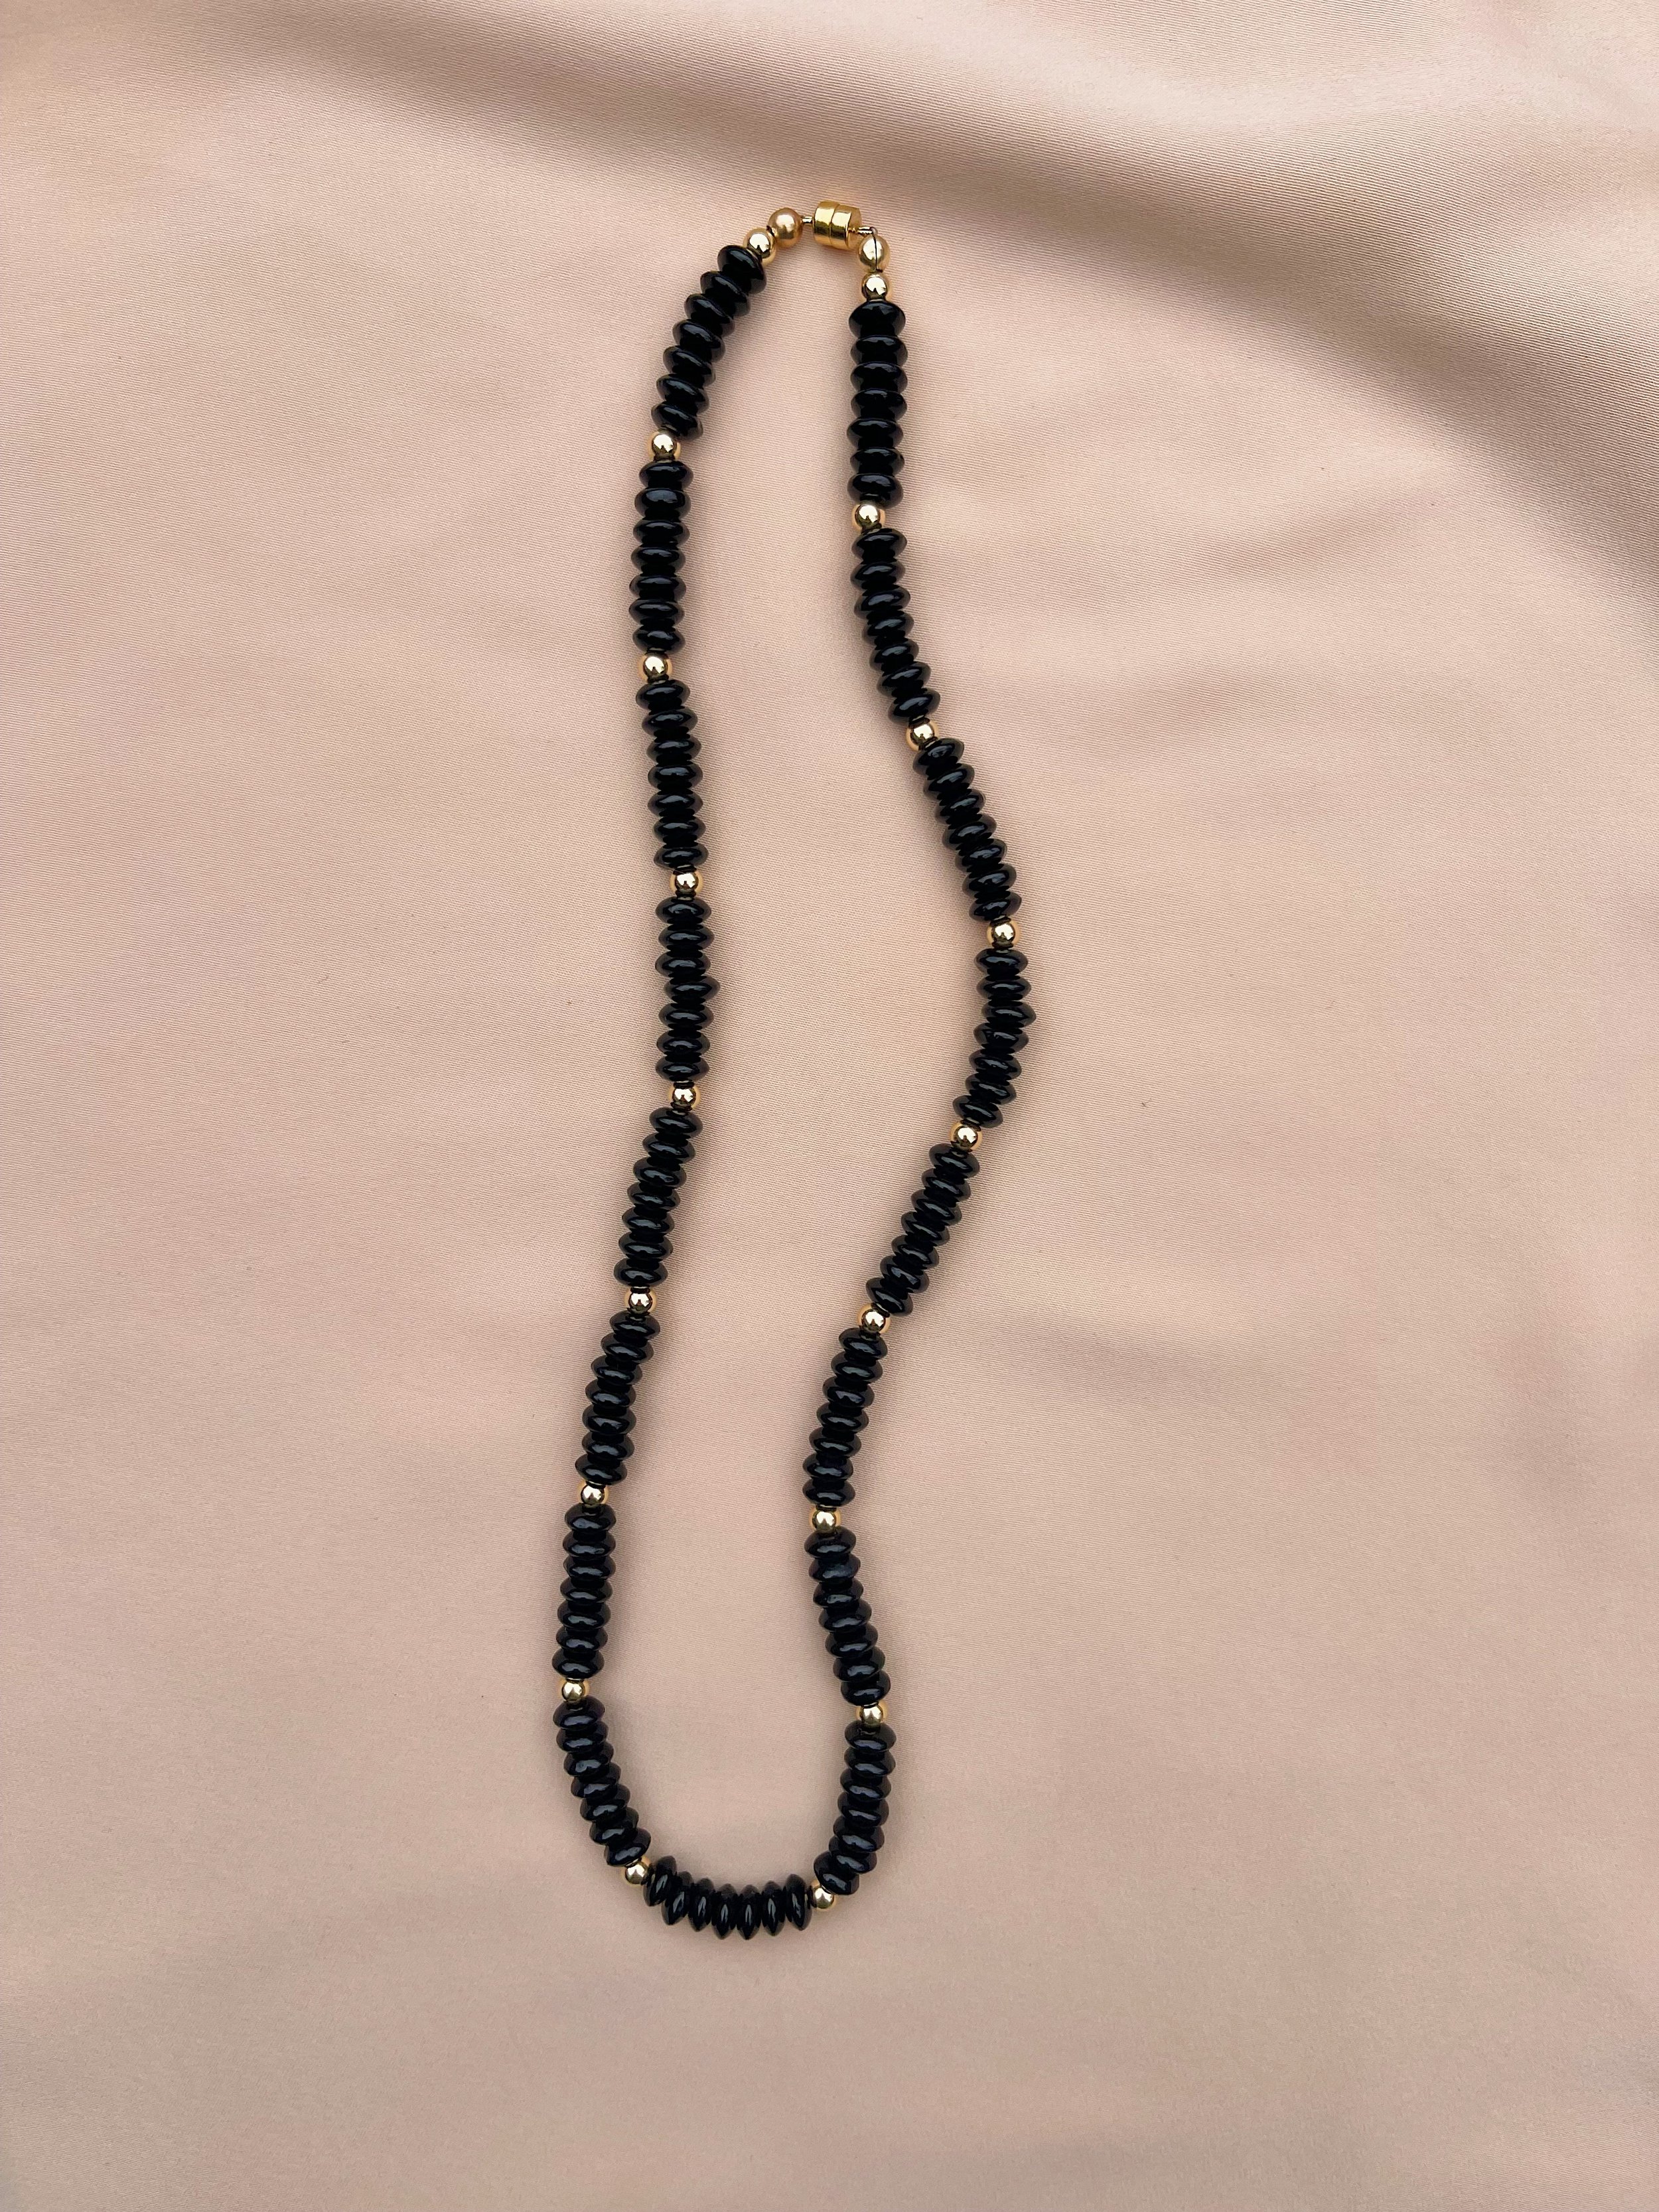 Black Onyx and 14k Gold-Filled Beaded Necklace — Mon Ete Studio ...